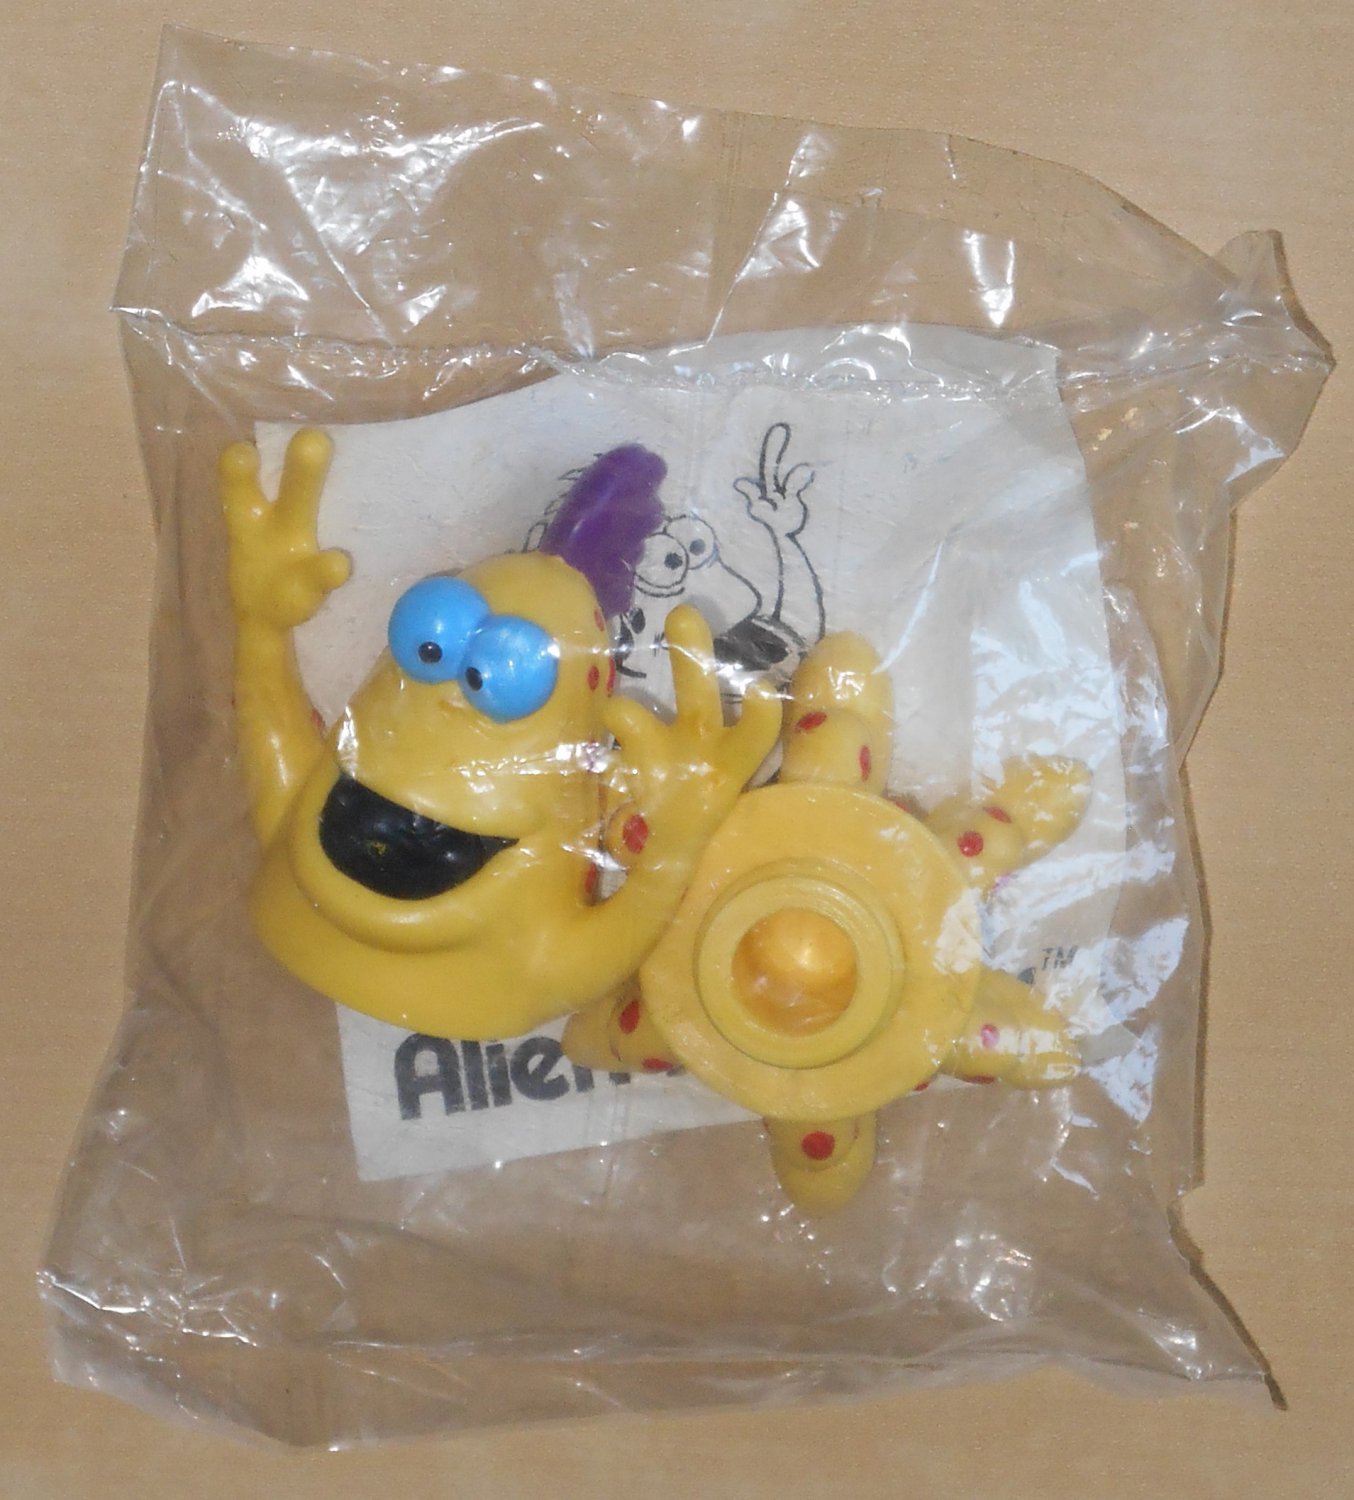 Alien Mix-Ups Yallow-Boid Toy Applause Yellow New in Bag NIP 1990